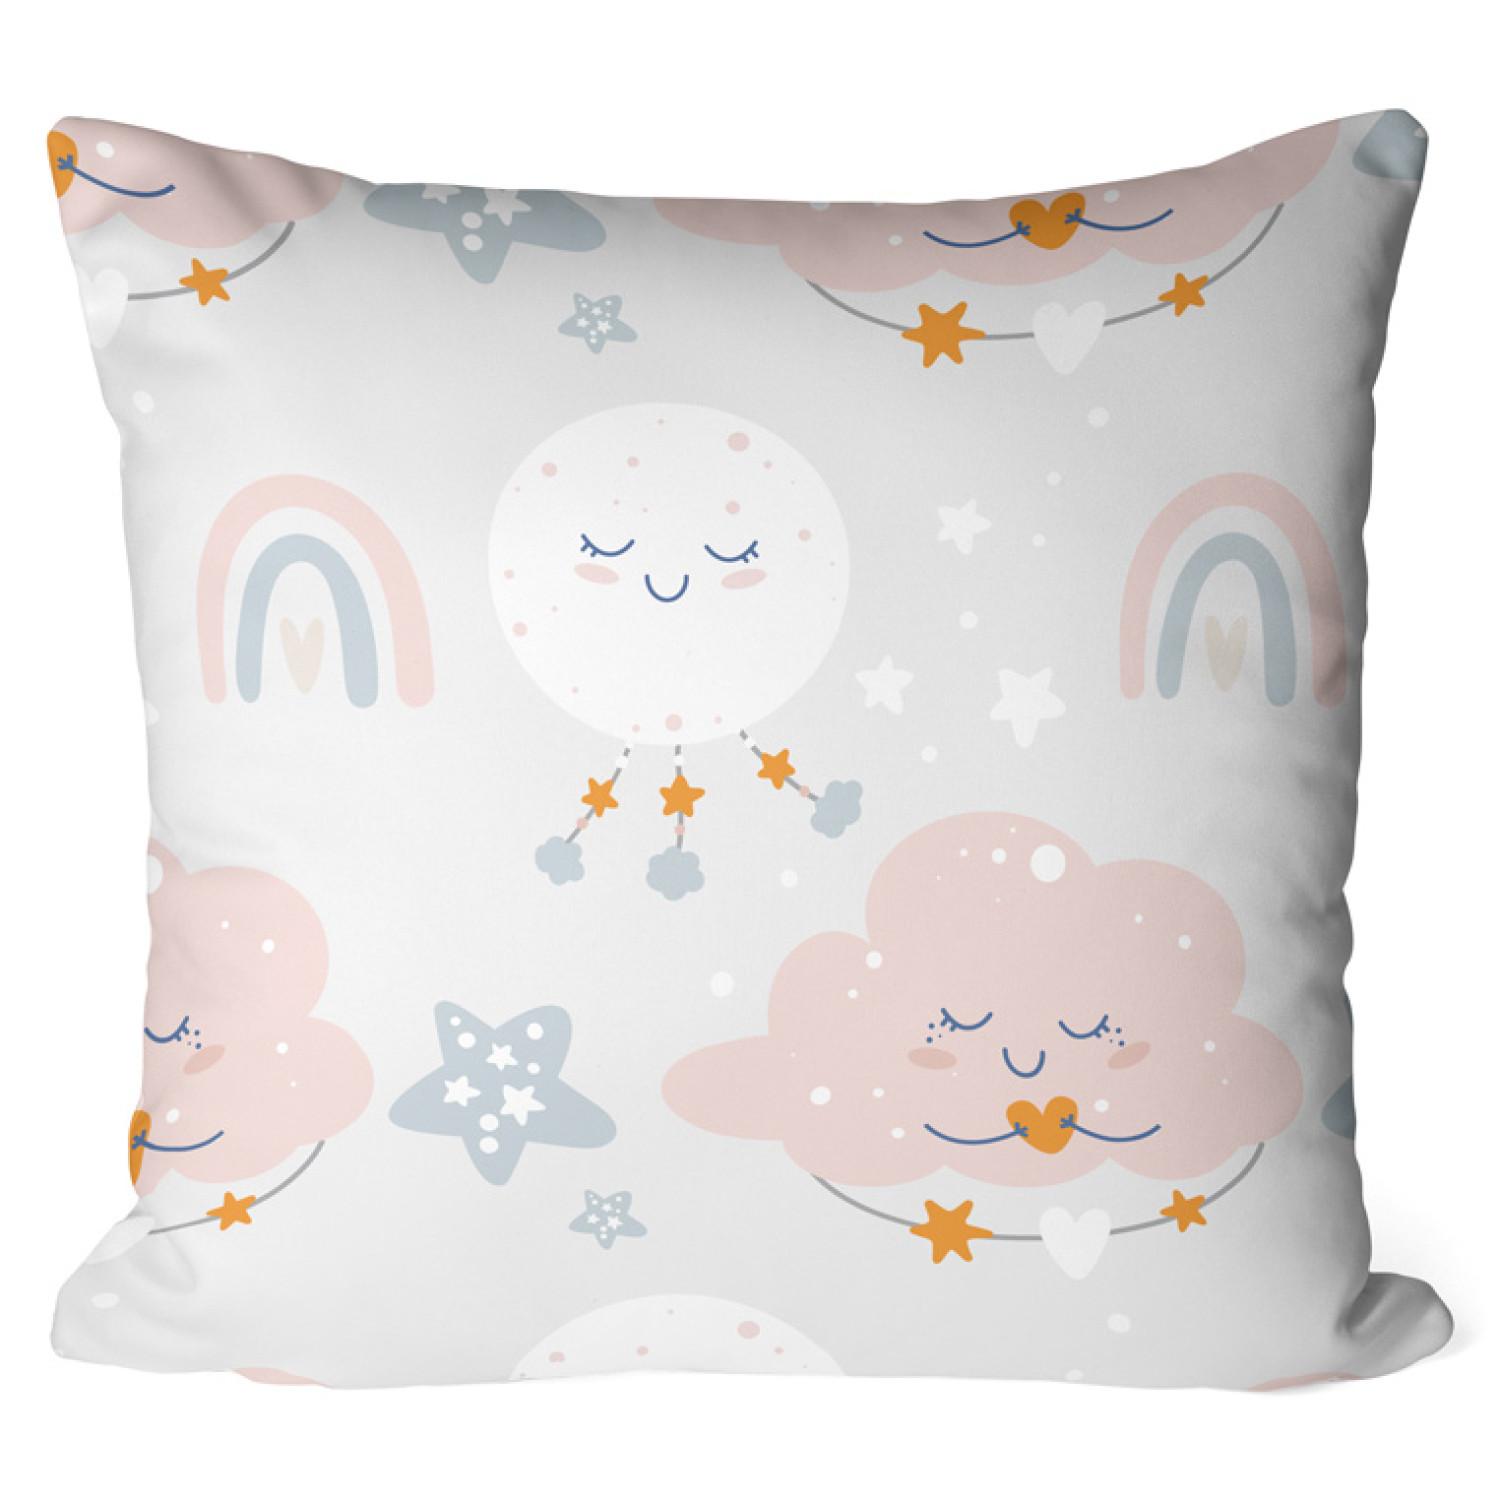 Decorative Microfiber Pillow Playful clouds - a composition in subdued colour palette cushions